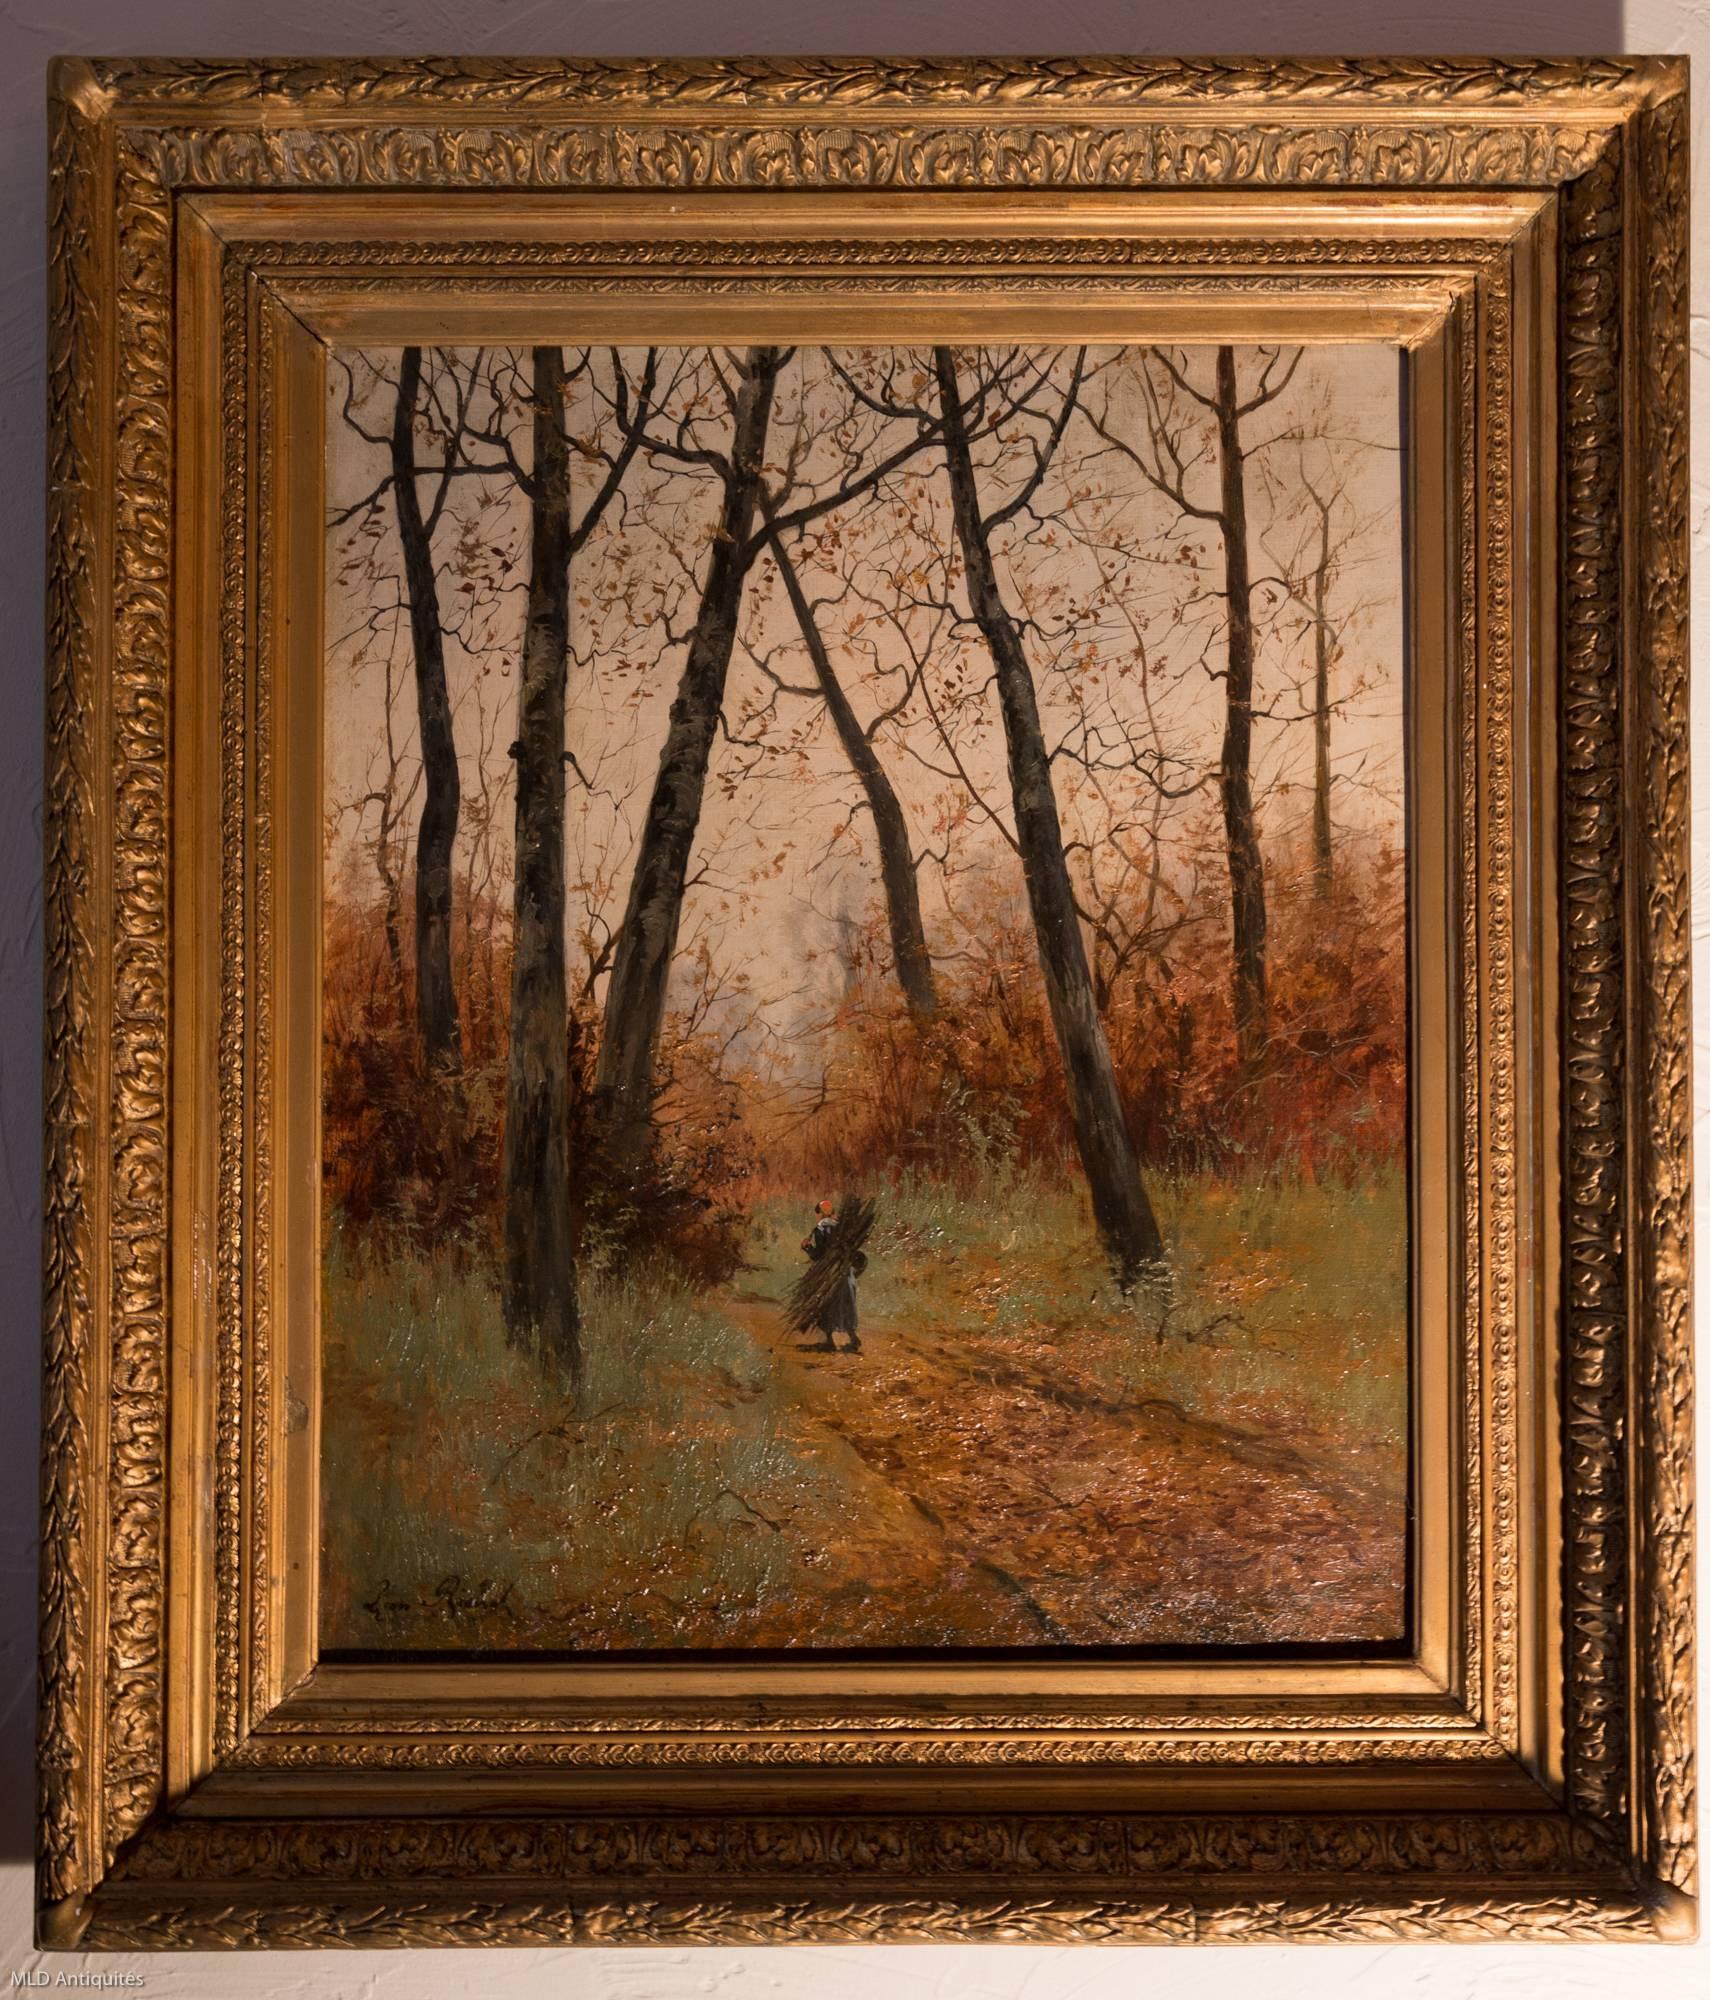 Interesting and decorative late 19th century Barbizon School, depicts an Fontainebleau landscape. Our painting is signed by Leon Richet on a lower left.
The forest of Fontainebleau is beautiful, mysterious in autumn. Lovely colors difficult to